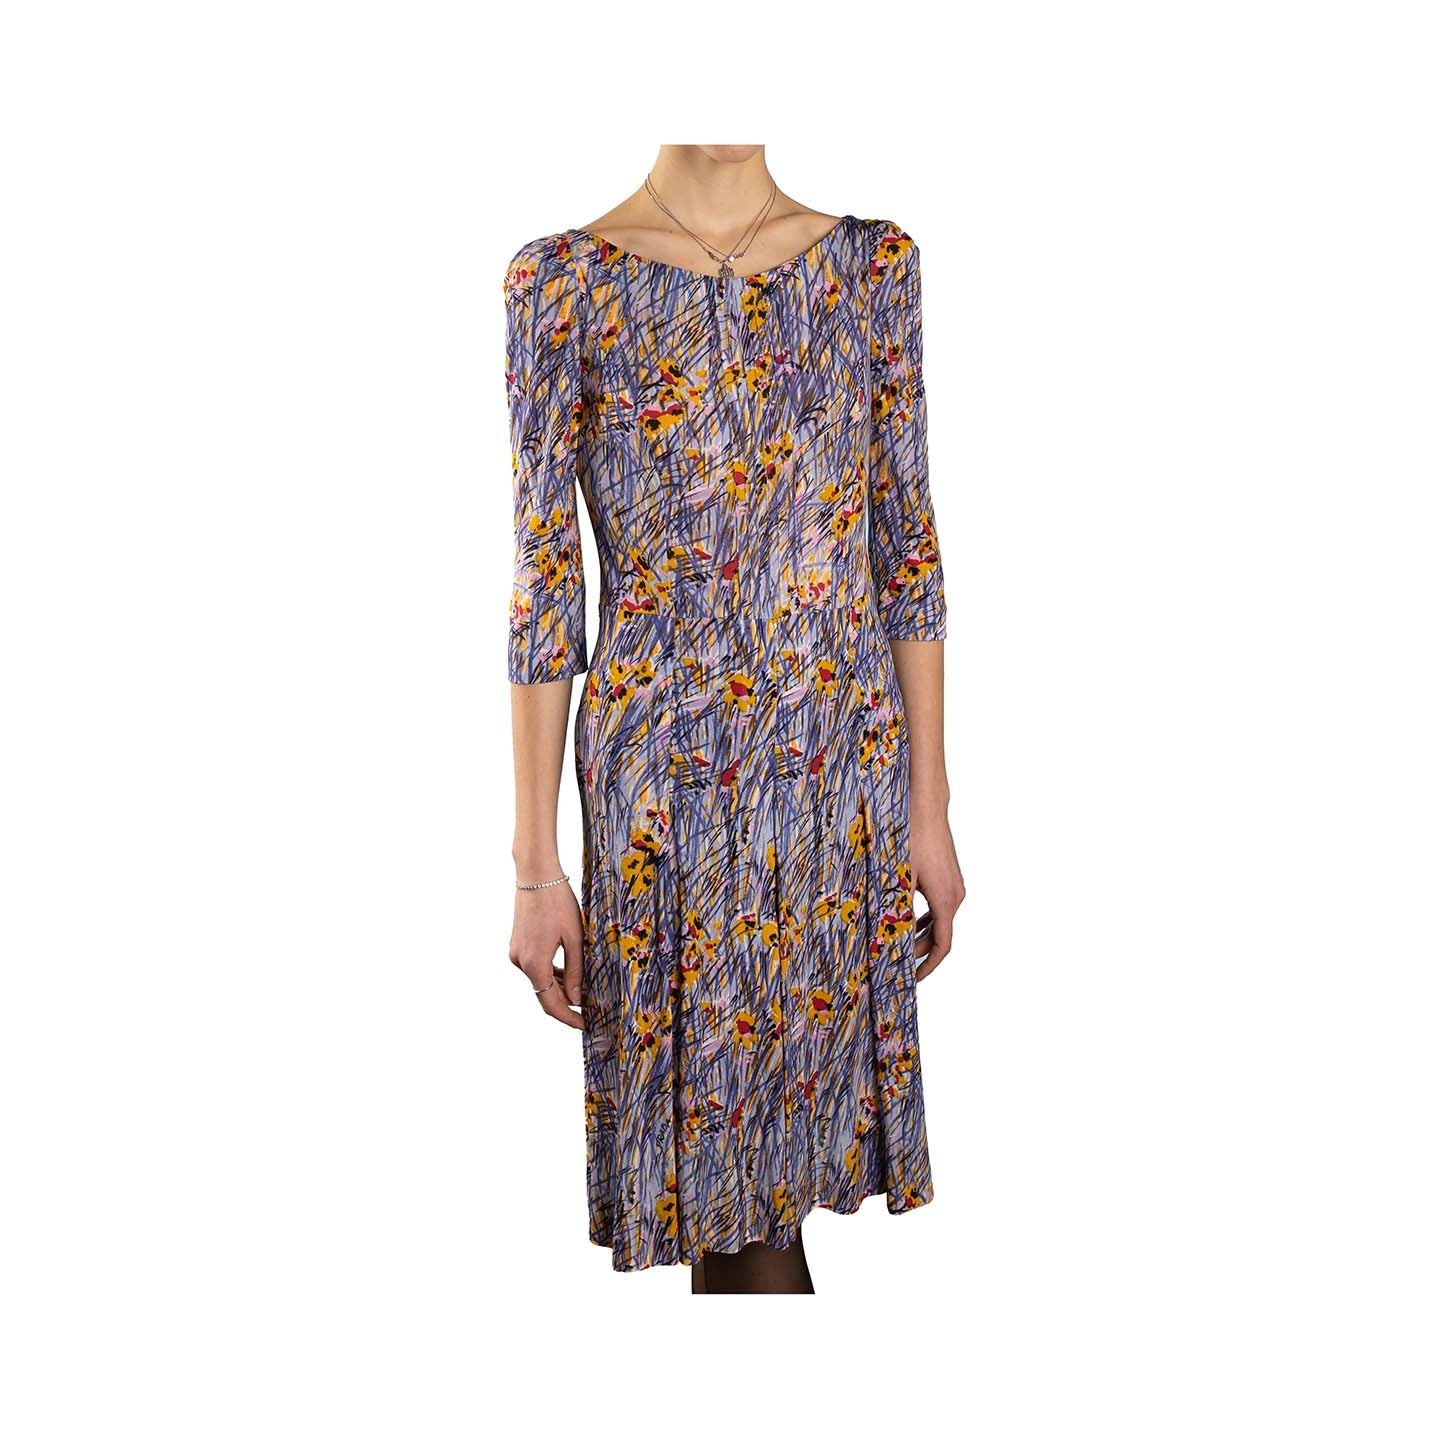 Prada knit dress printed with shaded foliage and flowers - S - 2000s